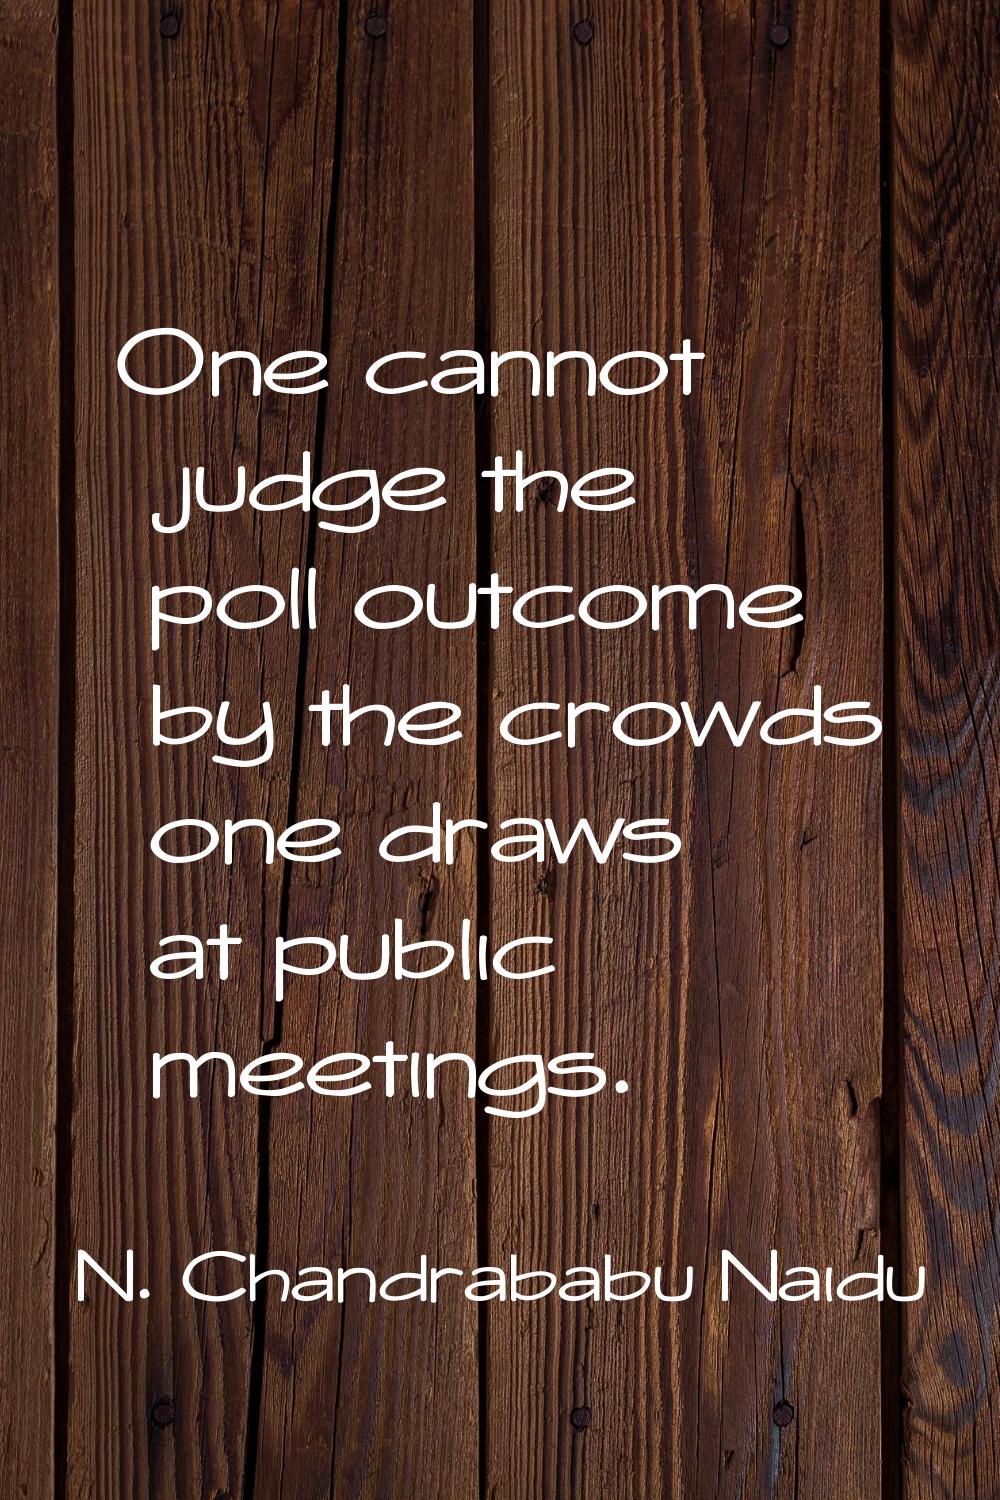 One cannot judge the poll outcome by the crowds one draws at public meetings.